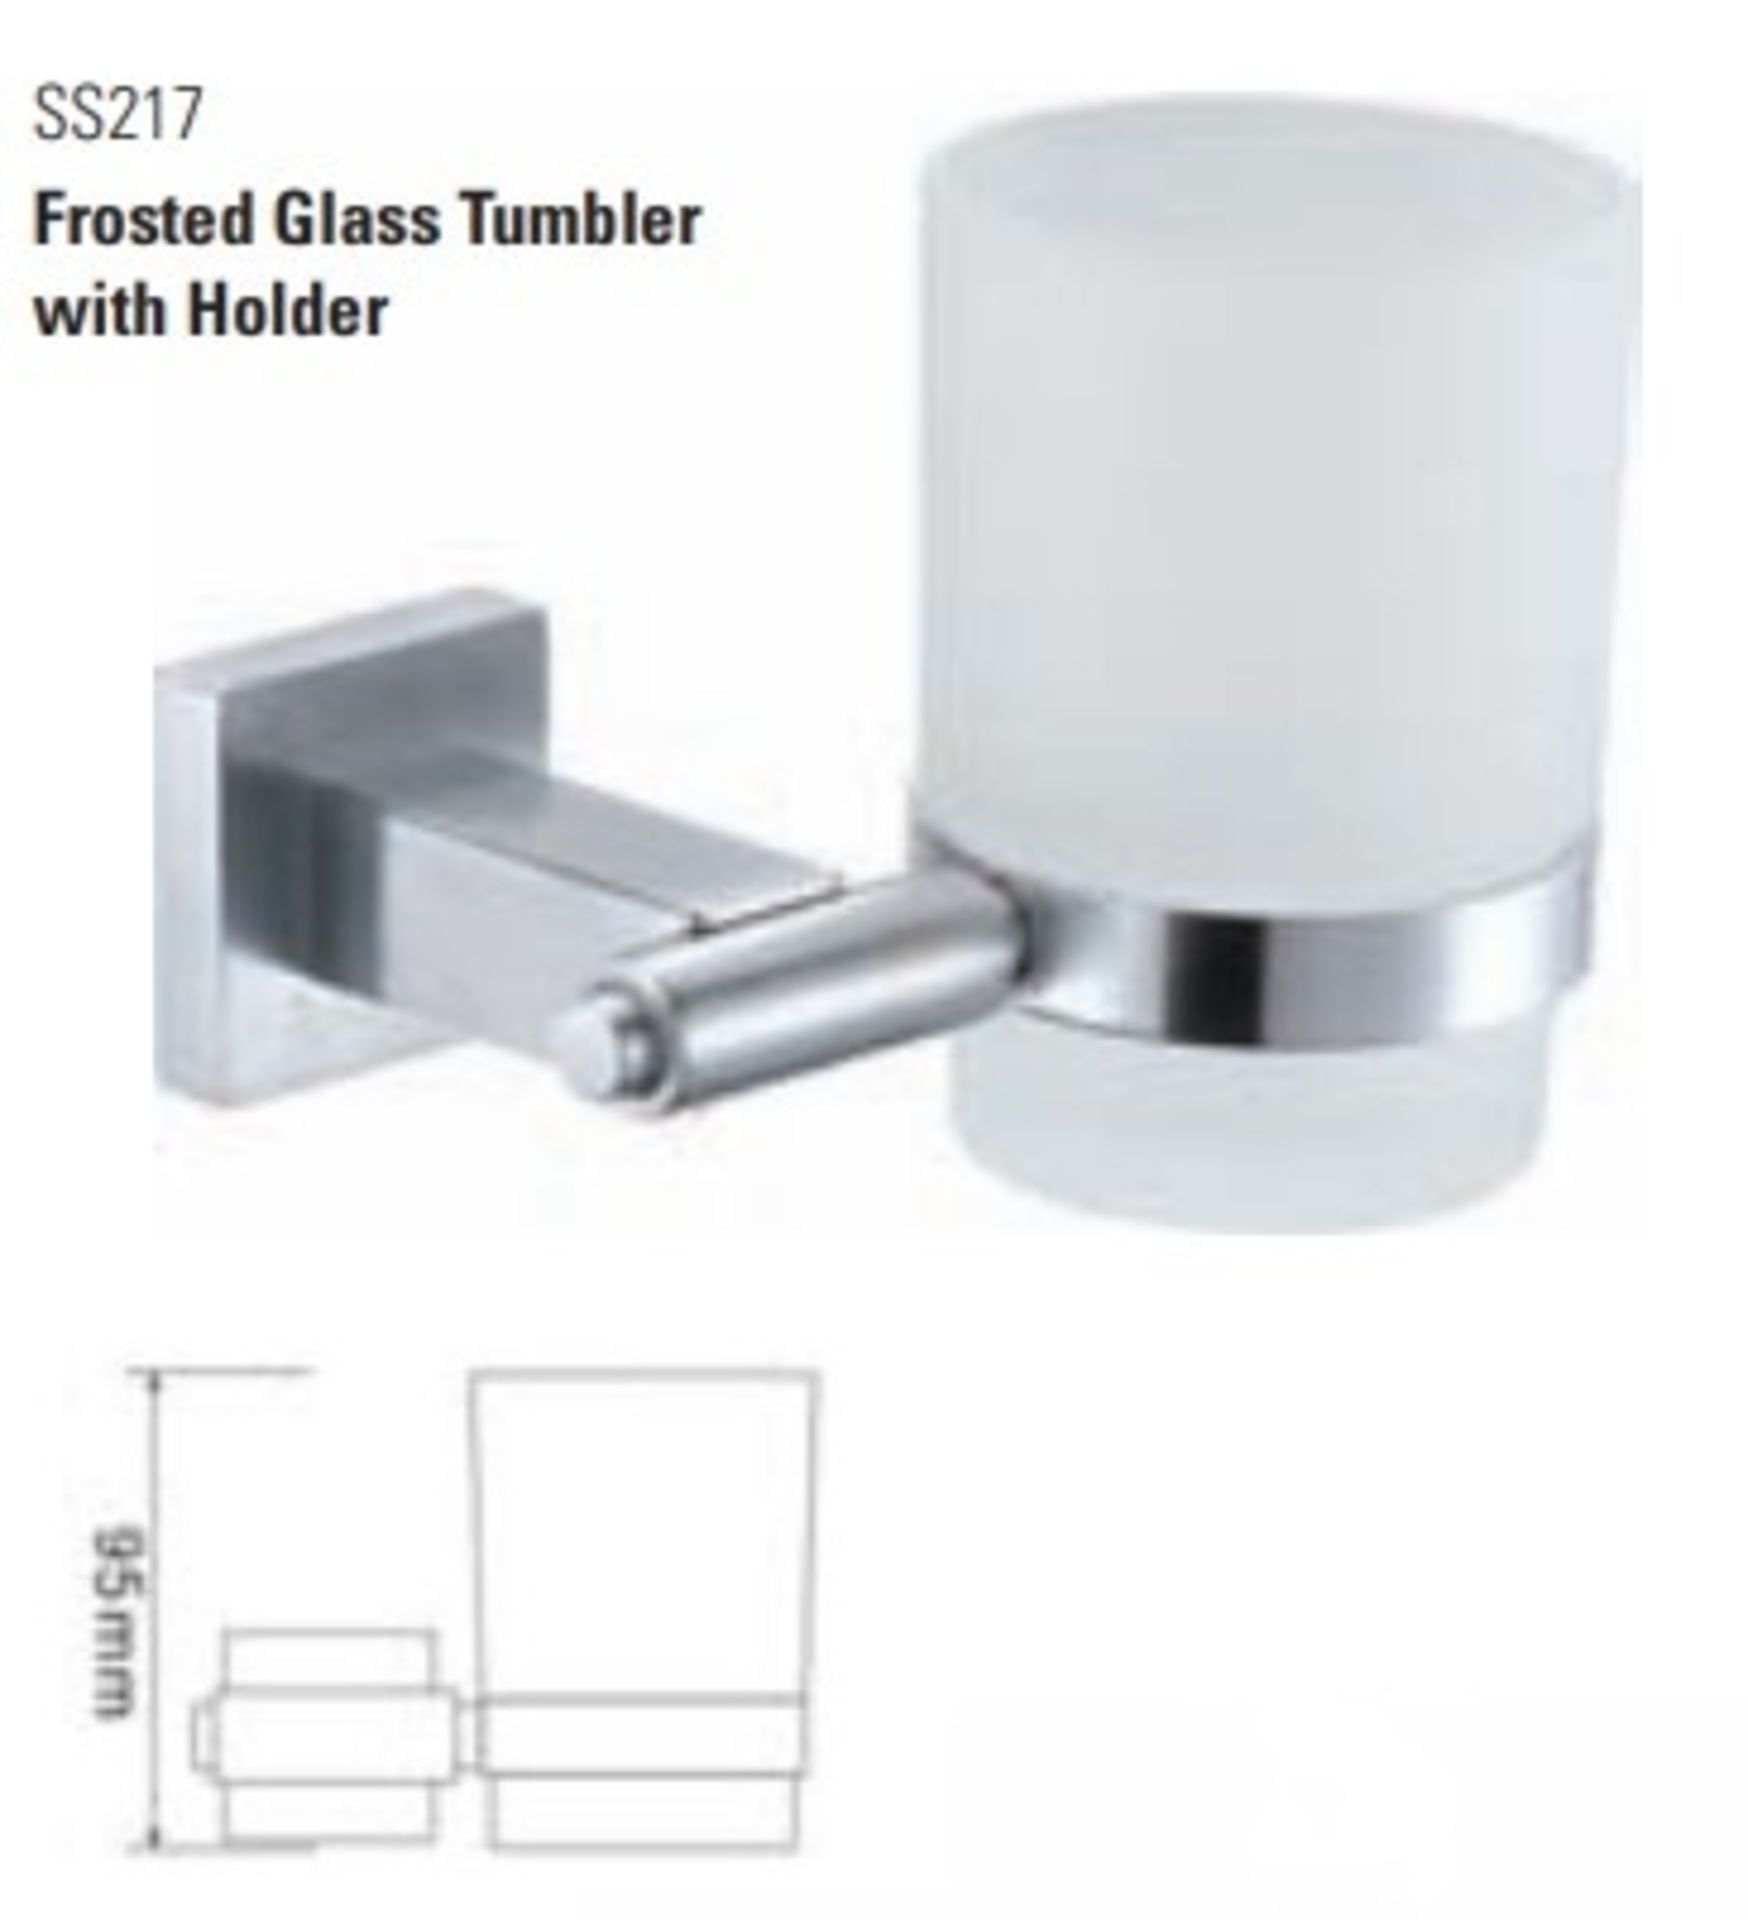 1 x Stonearth Frosted Glass Tumbler With Holder - Solid Stainless Steel Bathroom Accessory - Brand - Image 2 of 3